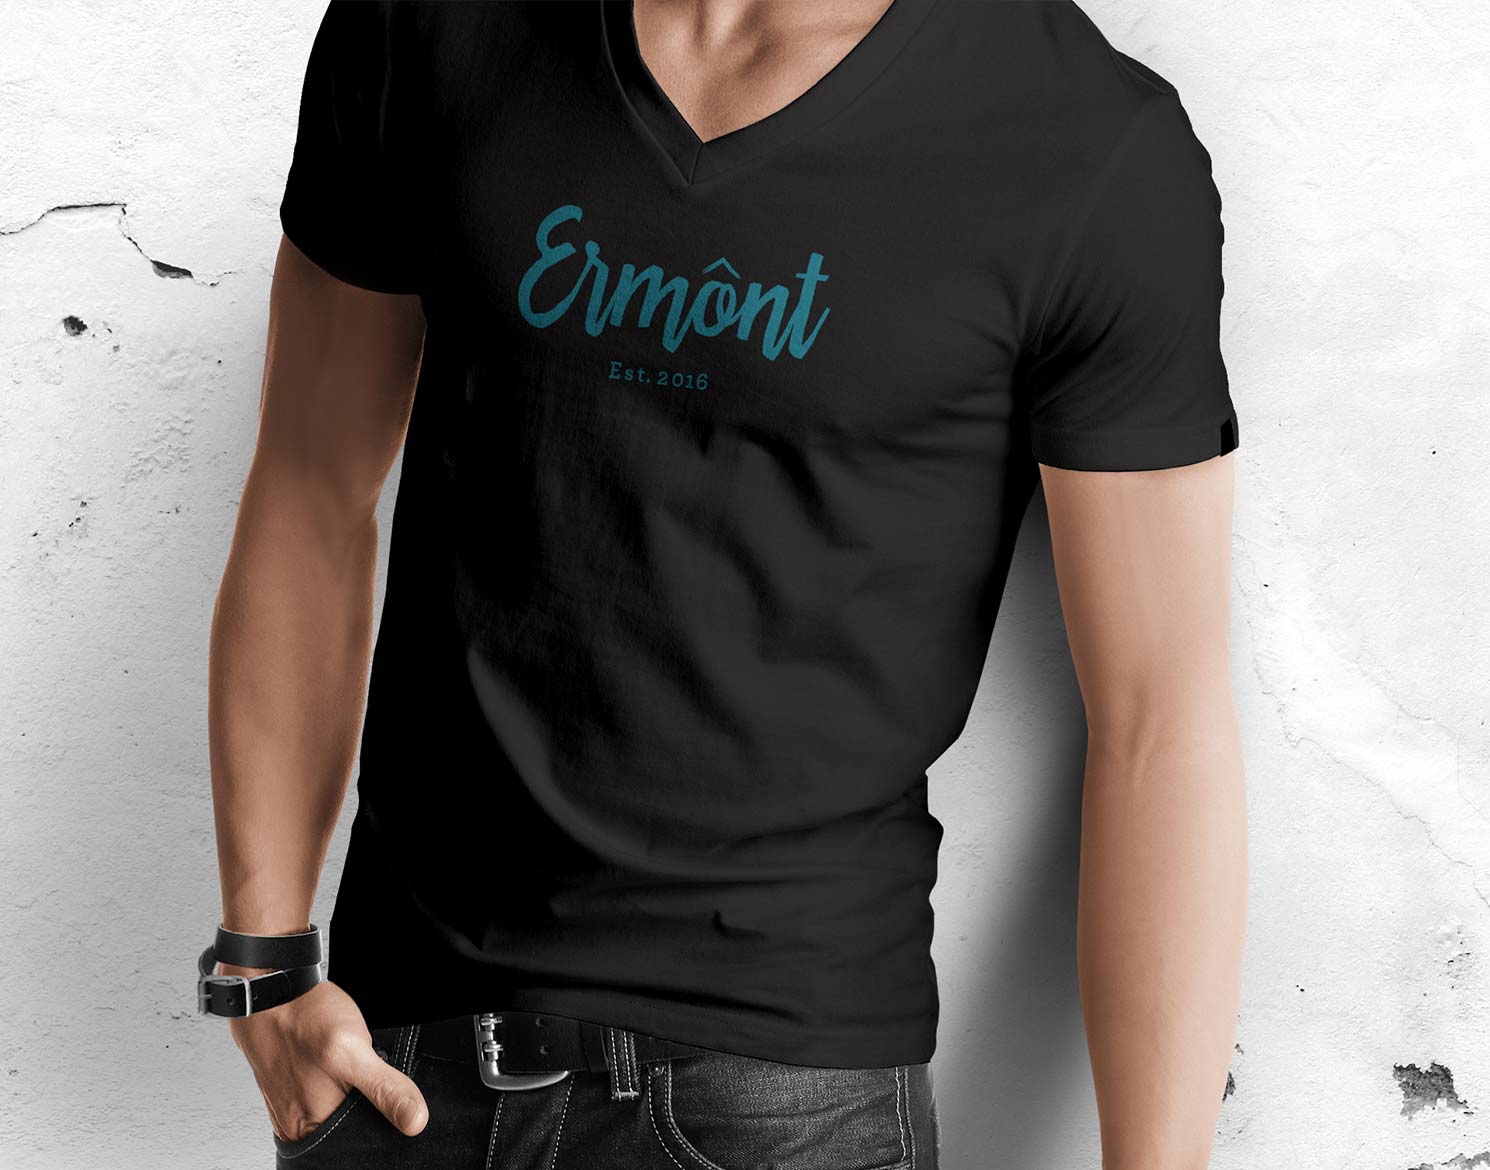 man wearing a t-shirt with Ermont logo on front